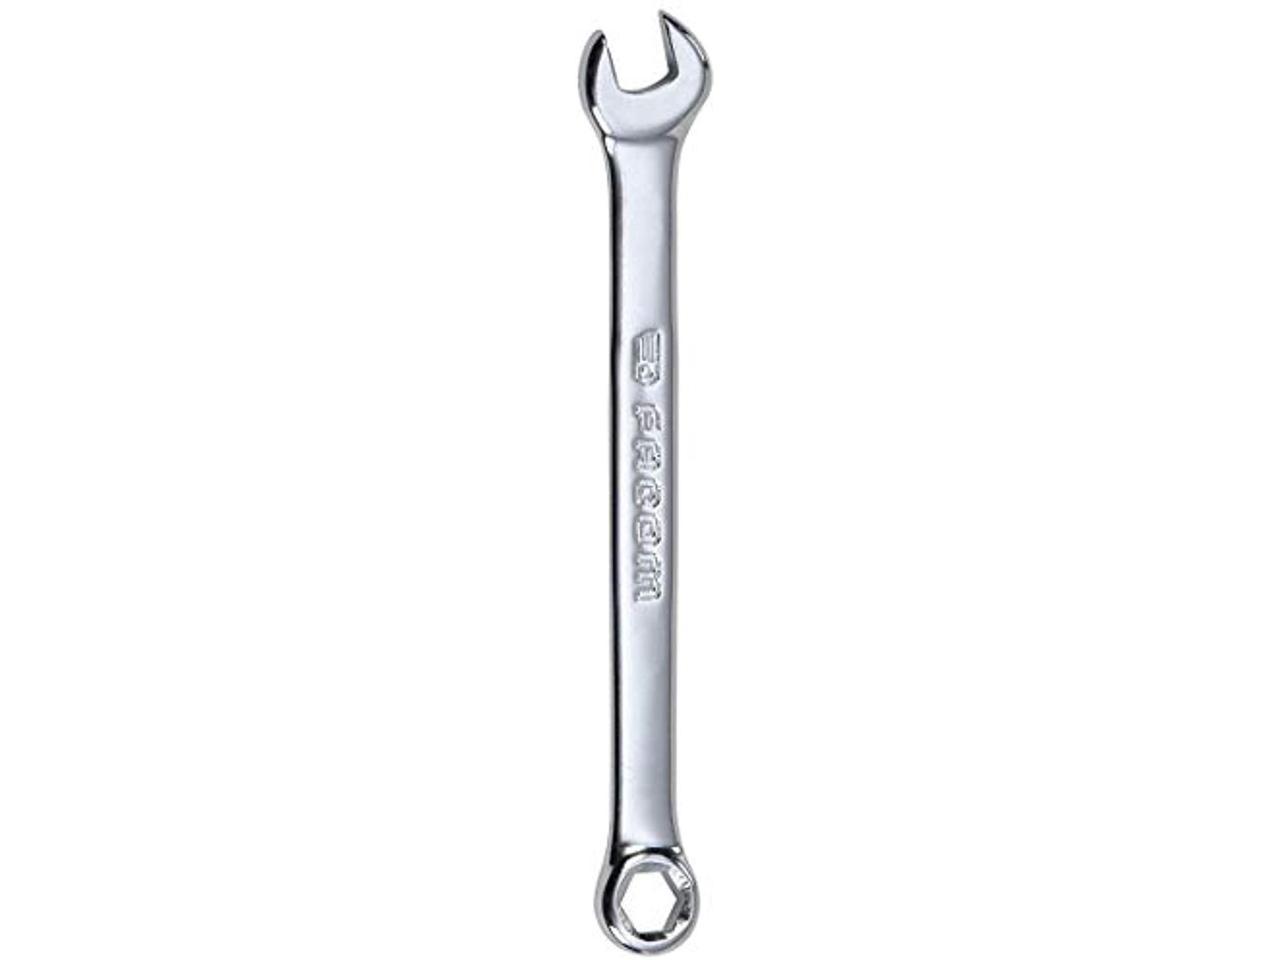 Wiha 35019 21mm-by 23mm Open End Wrench 